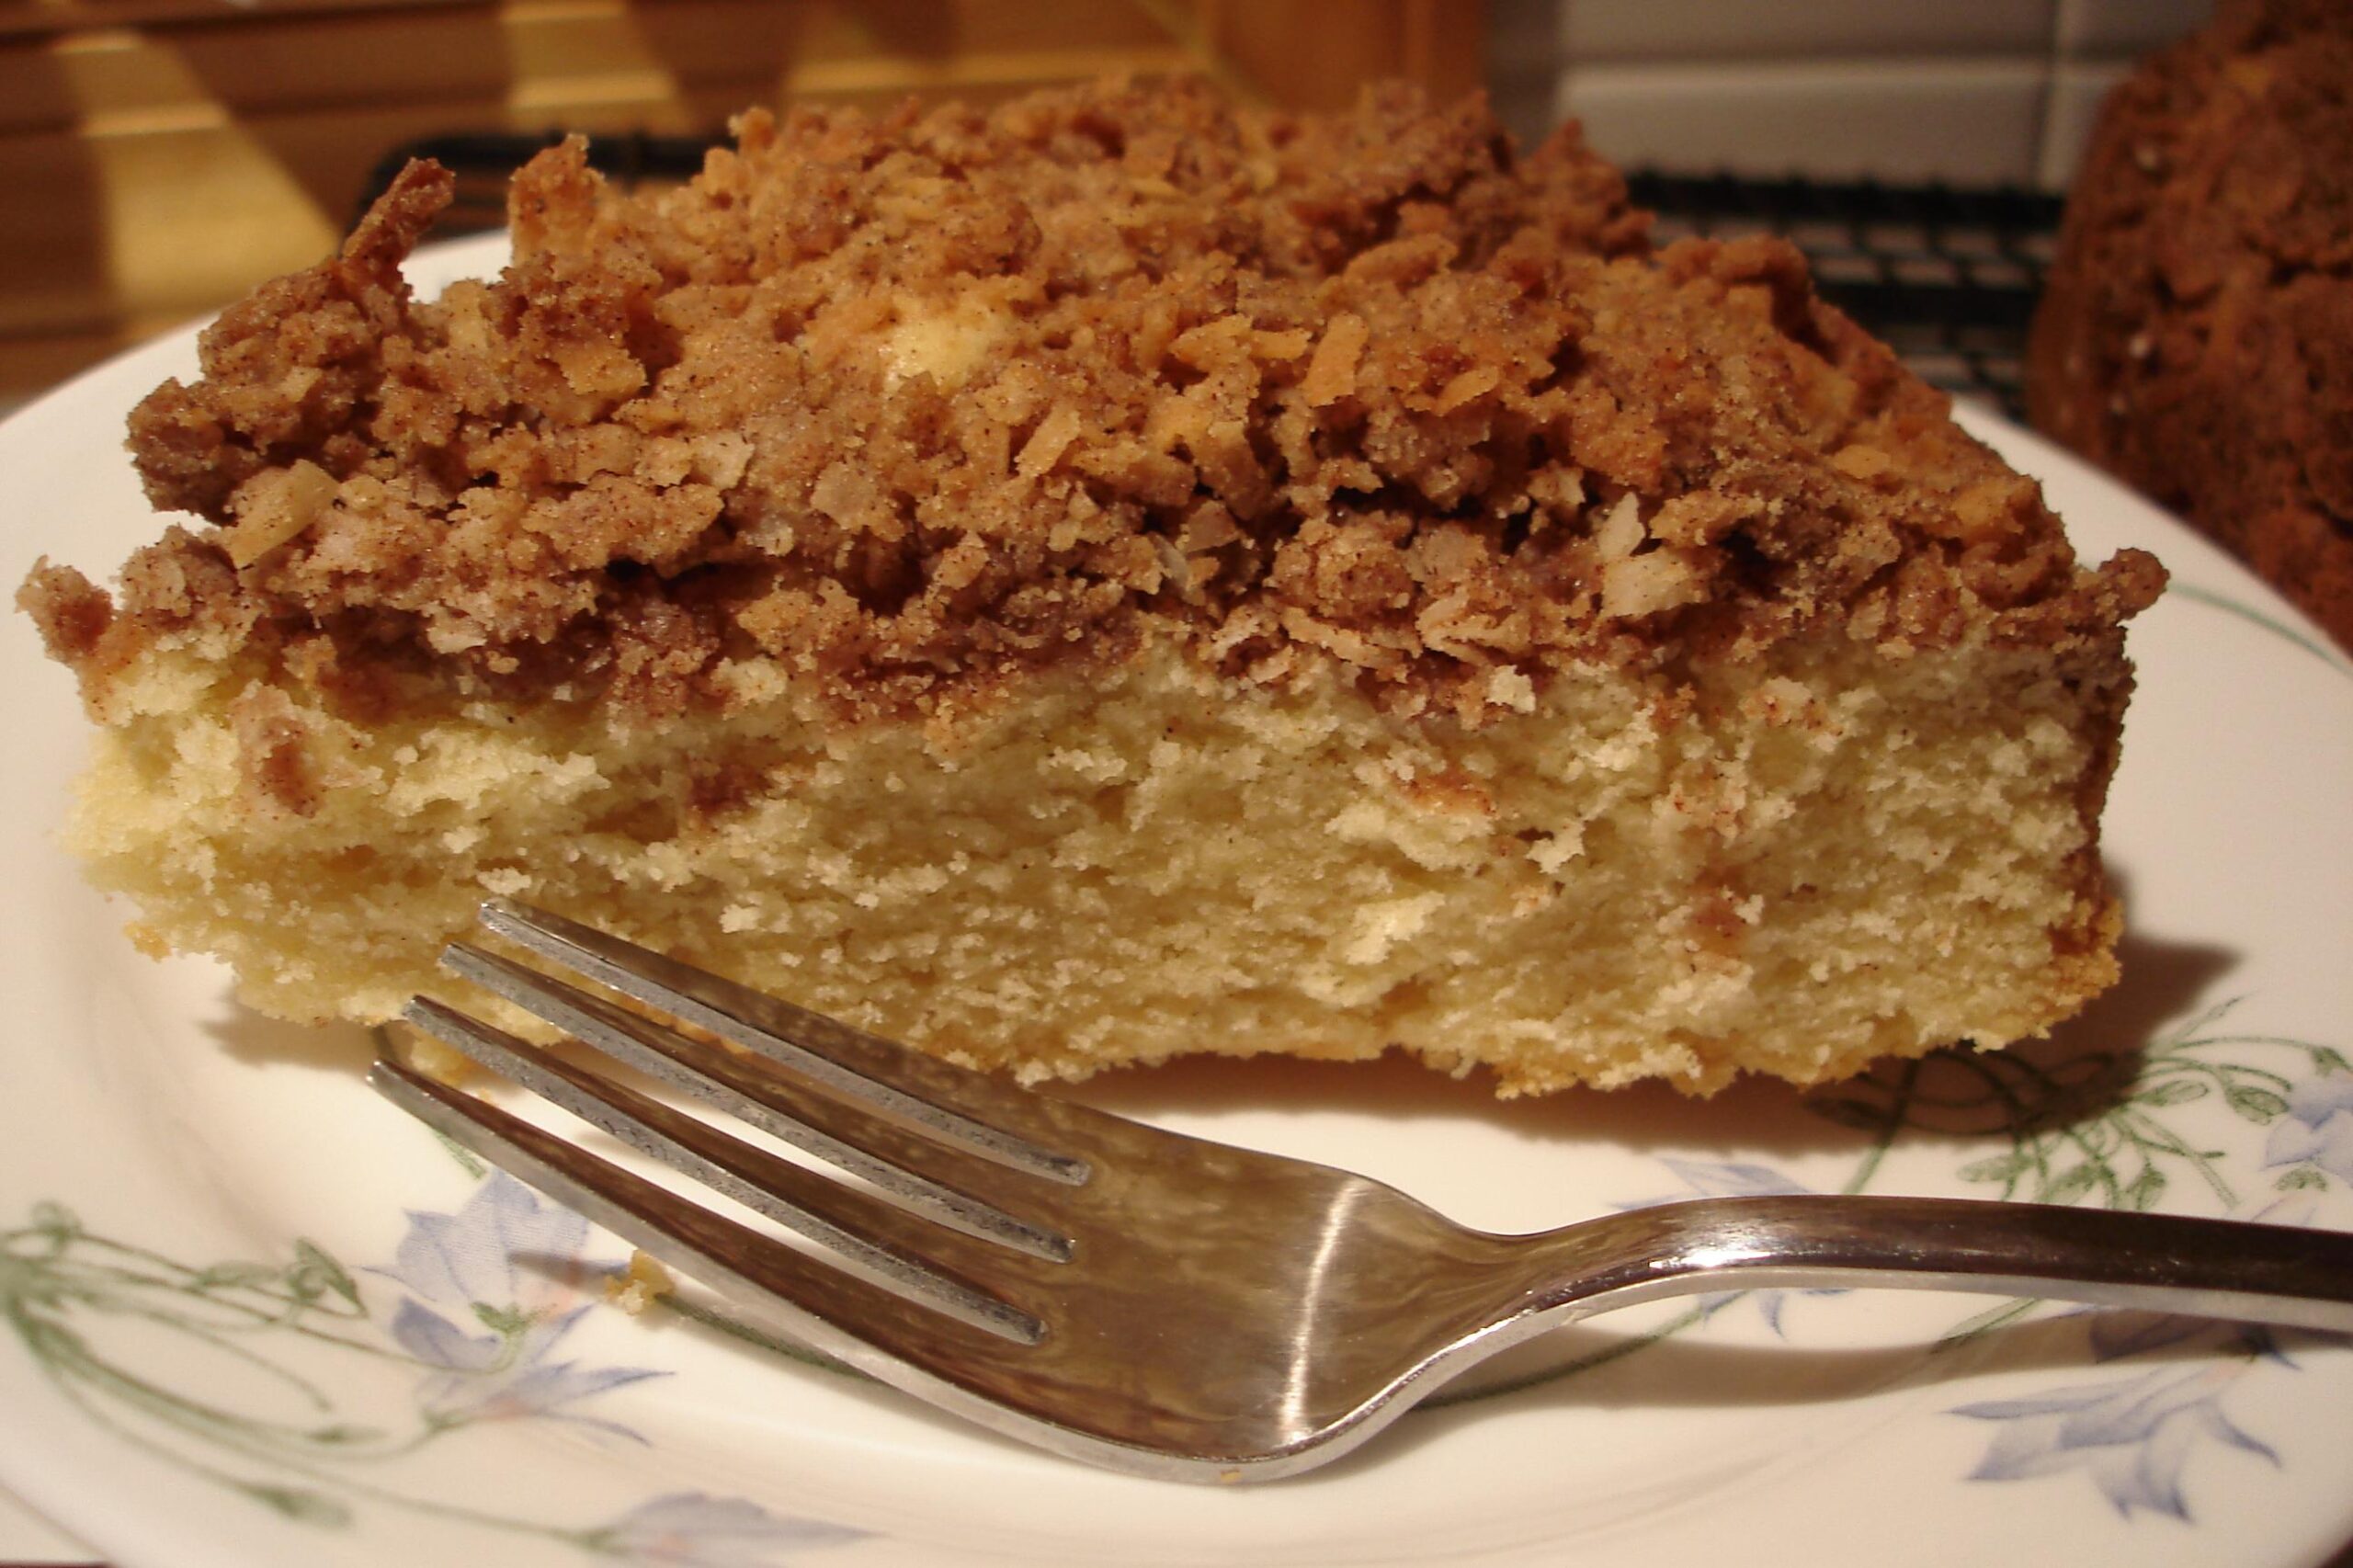  Wake up to the aroma of freshly brewed coffee with Toasted Coconut Coffee Cake!